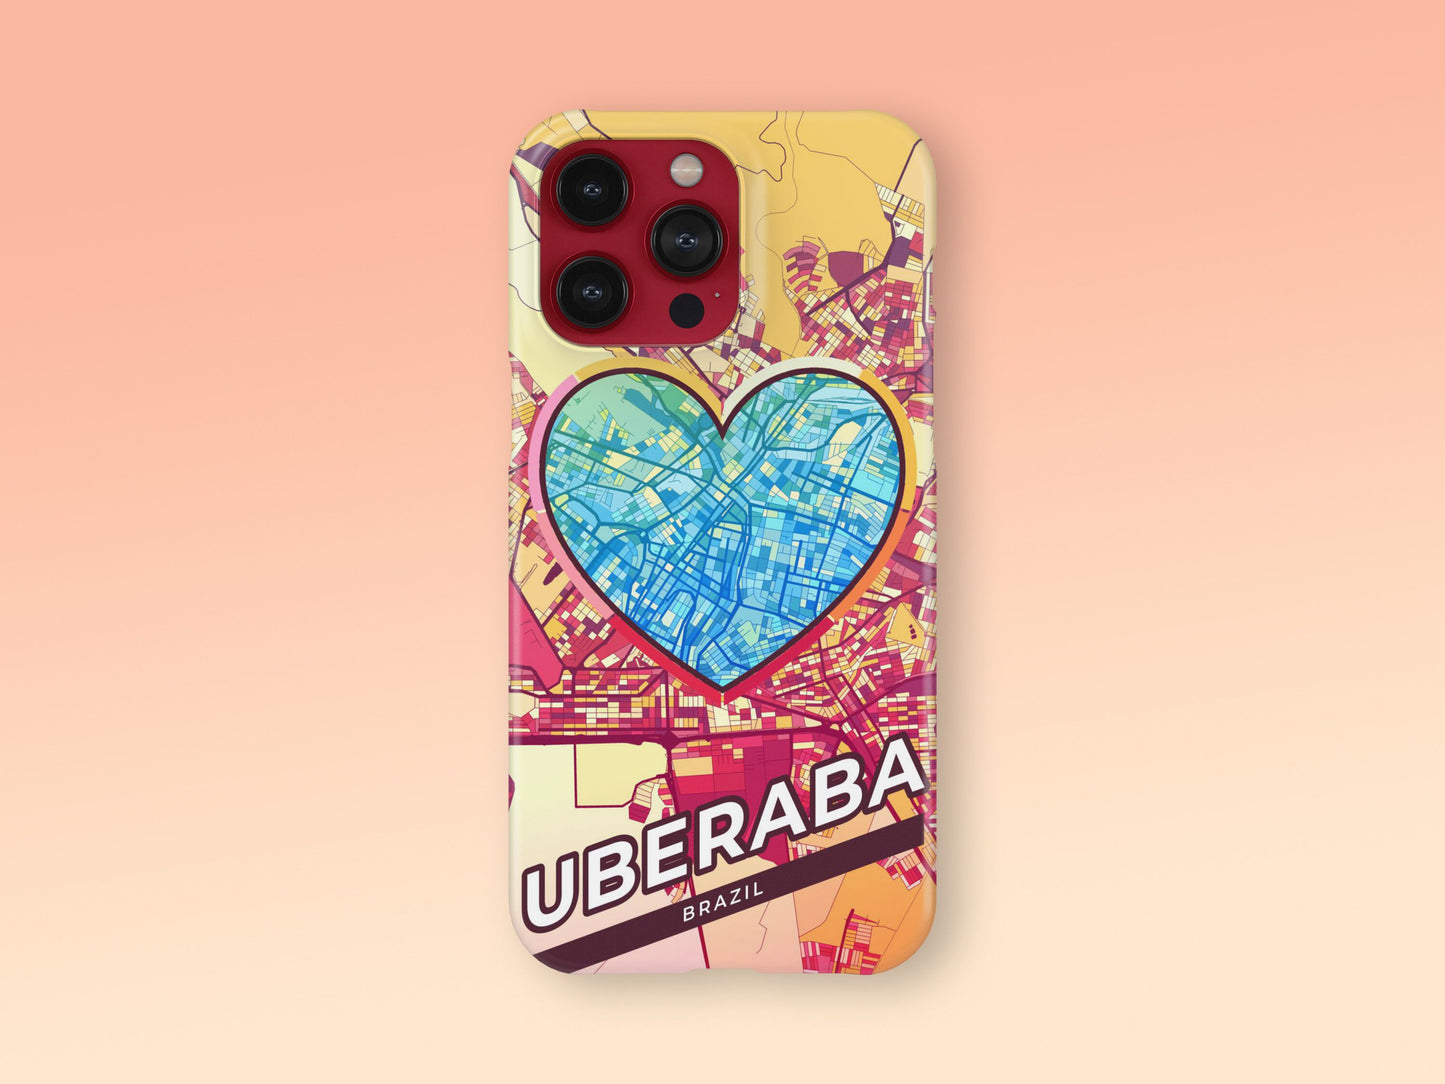 Uberaba Brazil slim phone case with colorful icon. Birthday, wedding or housewarming gift. Couple match cases. 2